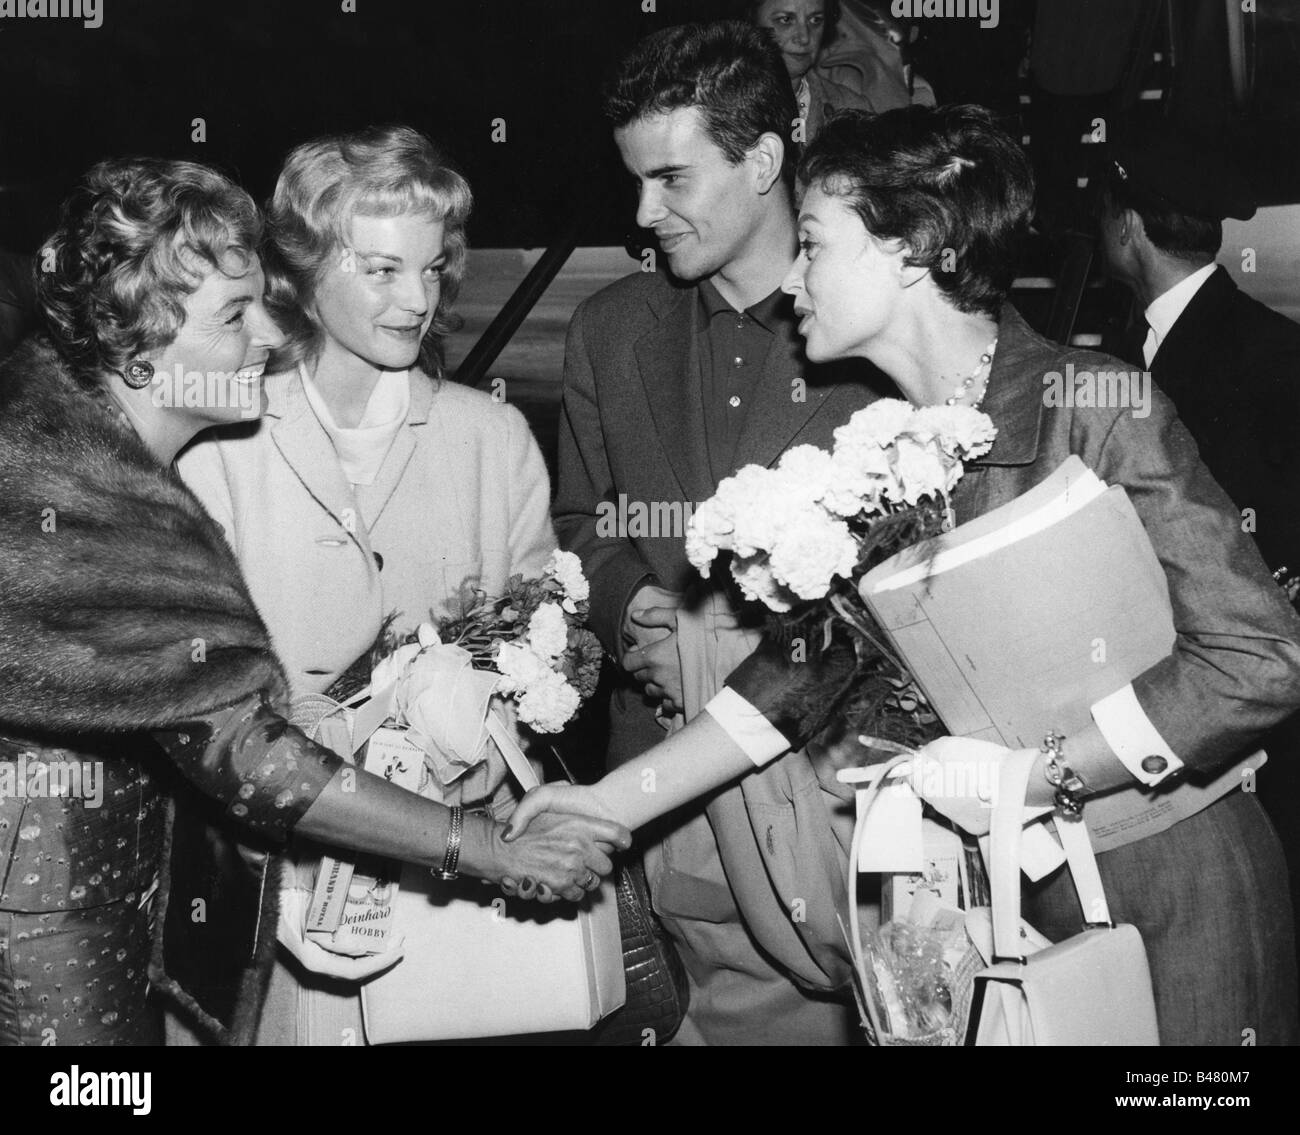 Schneider, Romy, 23.9.1938 - 29.5.1982, German actress, half length, with mother Magda Schneider, Horst Buchholz and Lilli Palmer, 1950s, Stock Photo